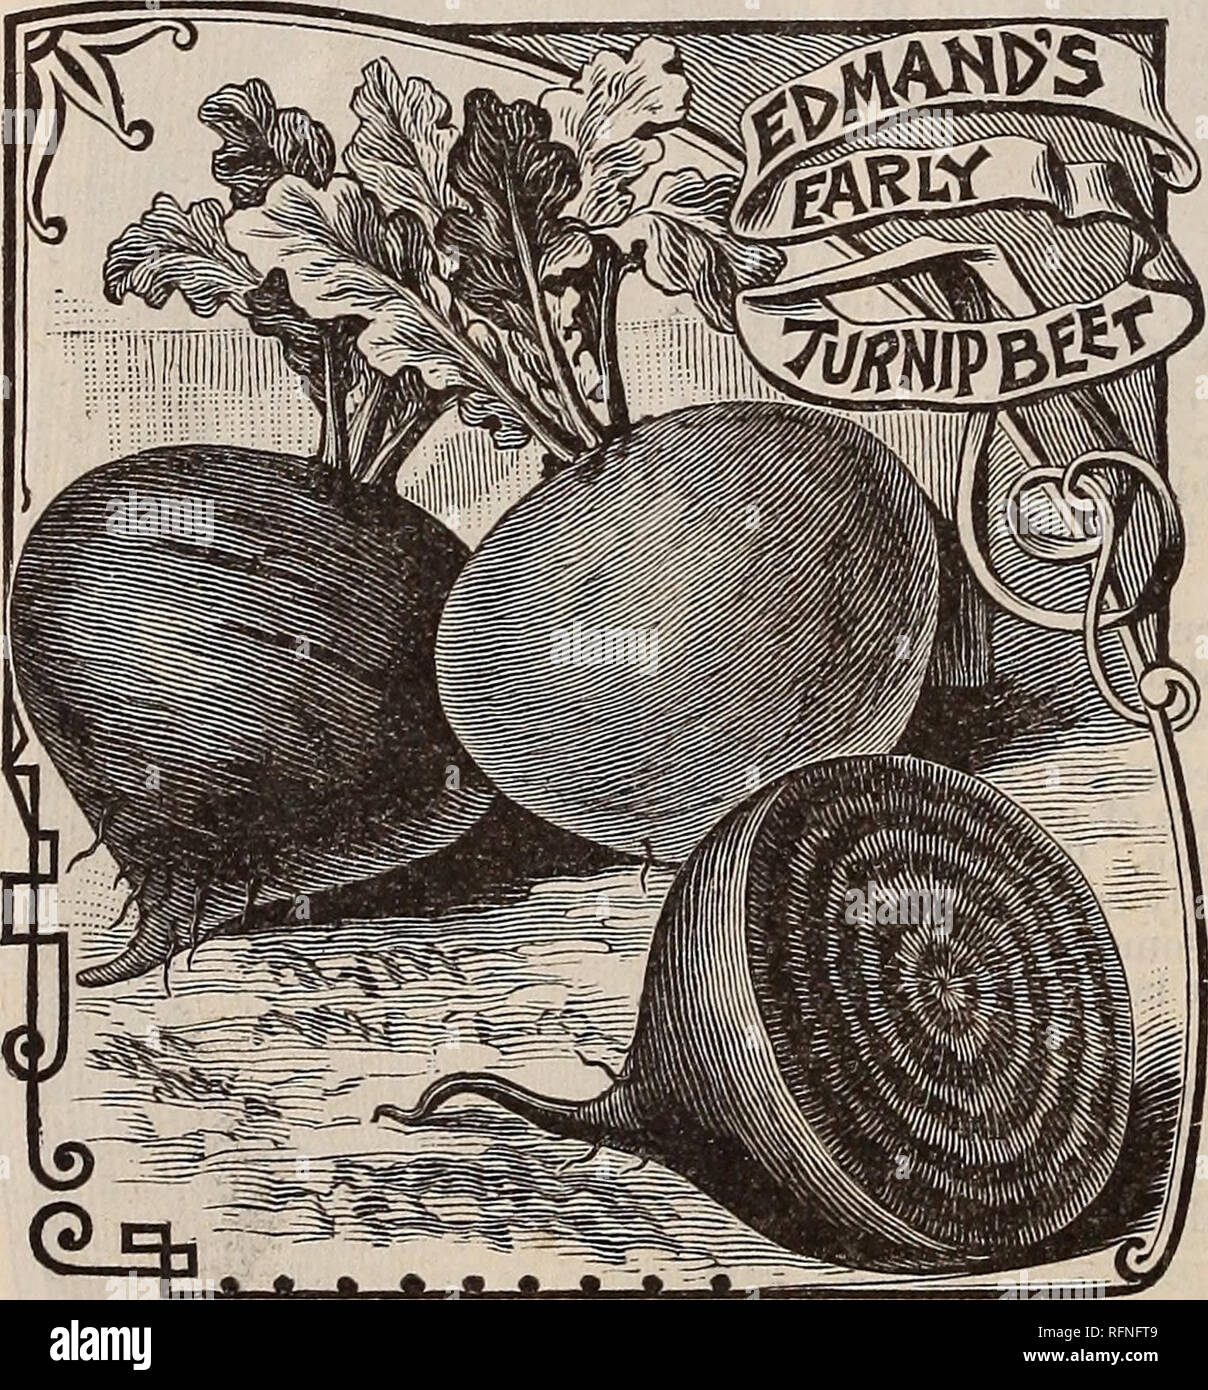 . Burpee's farm annual written at Fordhook Farm. Nurseries (Horticulture) Pennsylvania Philadelphia Catalogs; Vegetables Seeds Catalogs; Plants, Ornamental Catalogs; Flowers Seeds Catalogs. Garden BEETS. Our prices are for seeds, postpaid, by mail. flg^If ordered by express or freight, deduct TEN CENTS per pound from prices quoted. BURPEE'S EXTRA EARLY TURNIP BEET. Fully as early and of better quality than the Egyptian. It makes a fine market crop in seven or eight iveeks from sowing. Of fine, globular shape, and good size; the roots are very smooth. In color the flesh is of alternate rings of Stock Photo